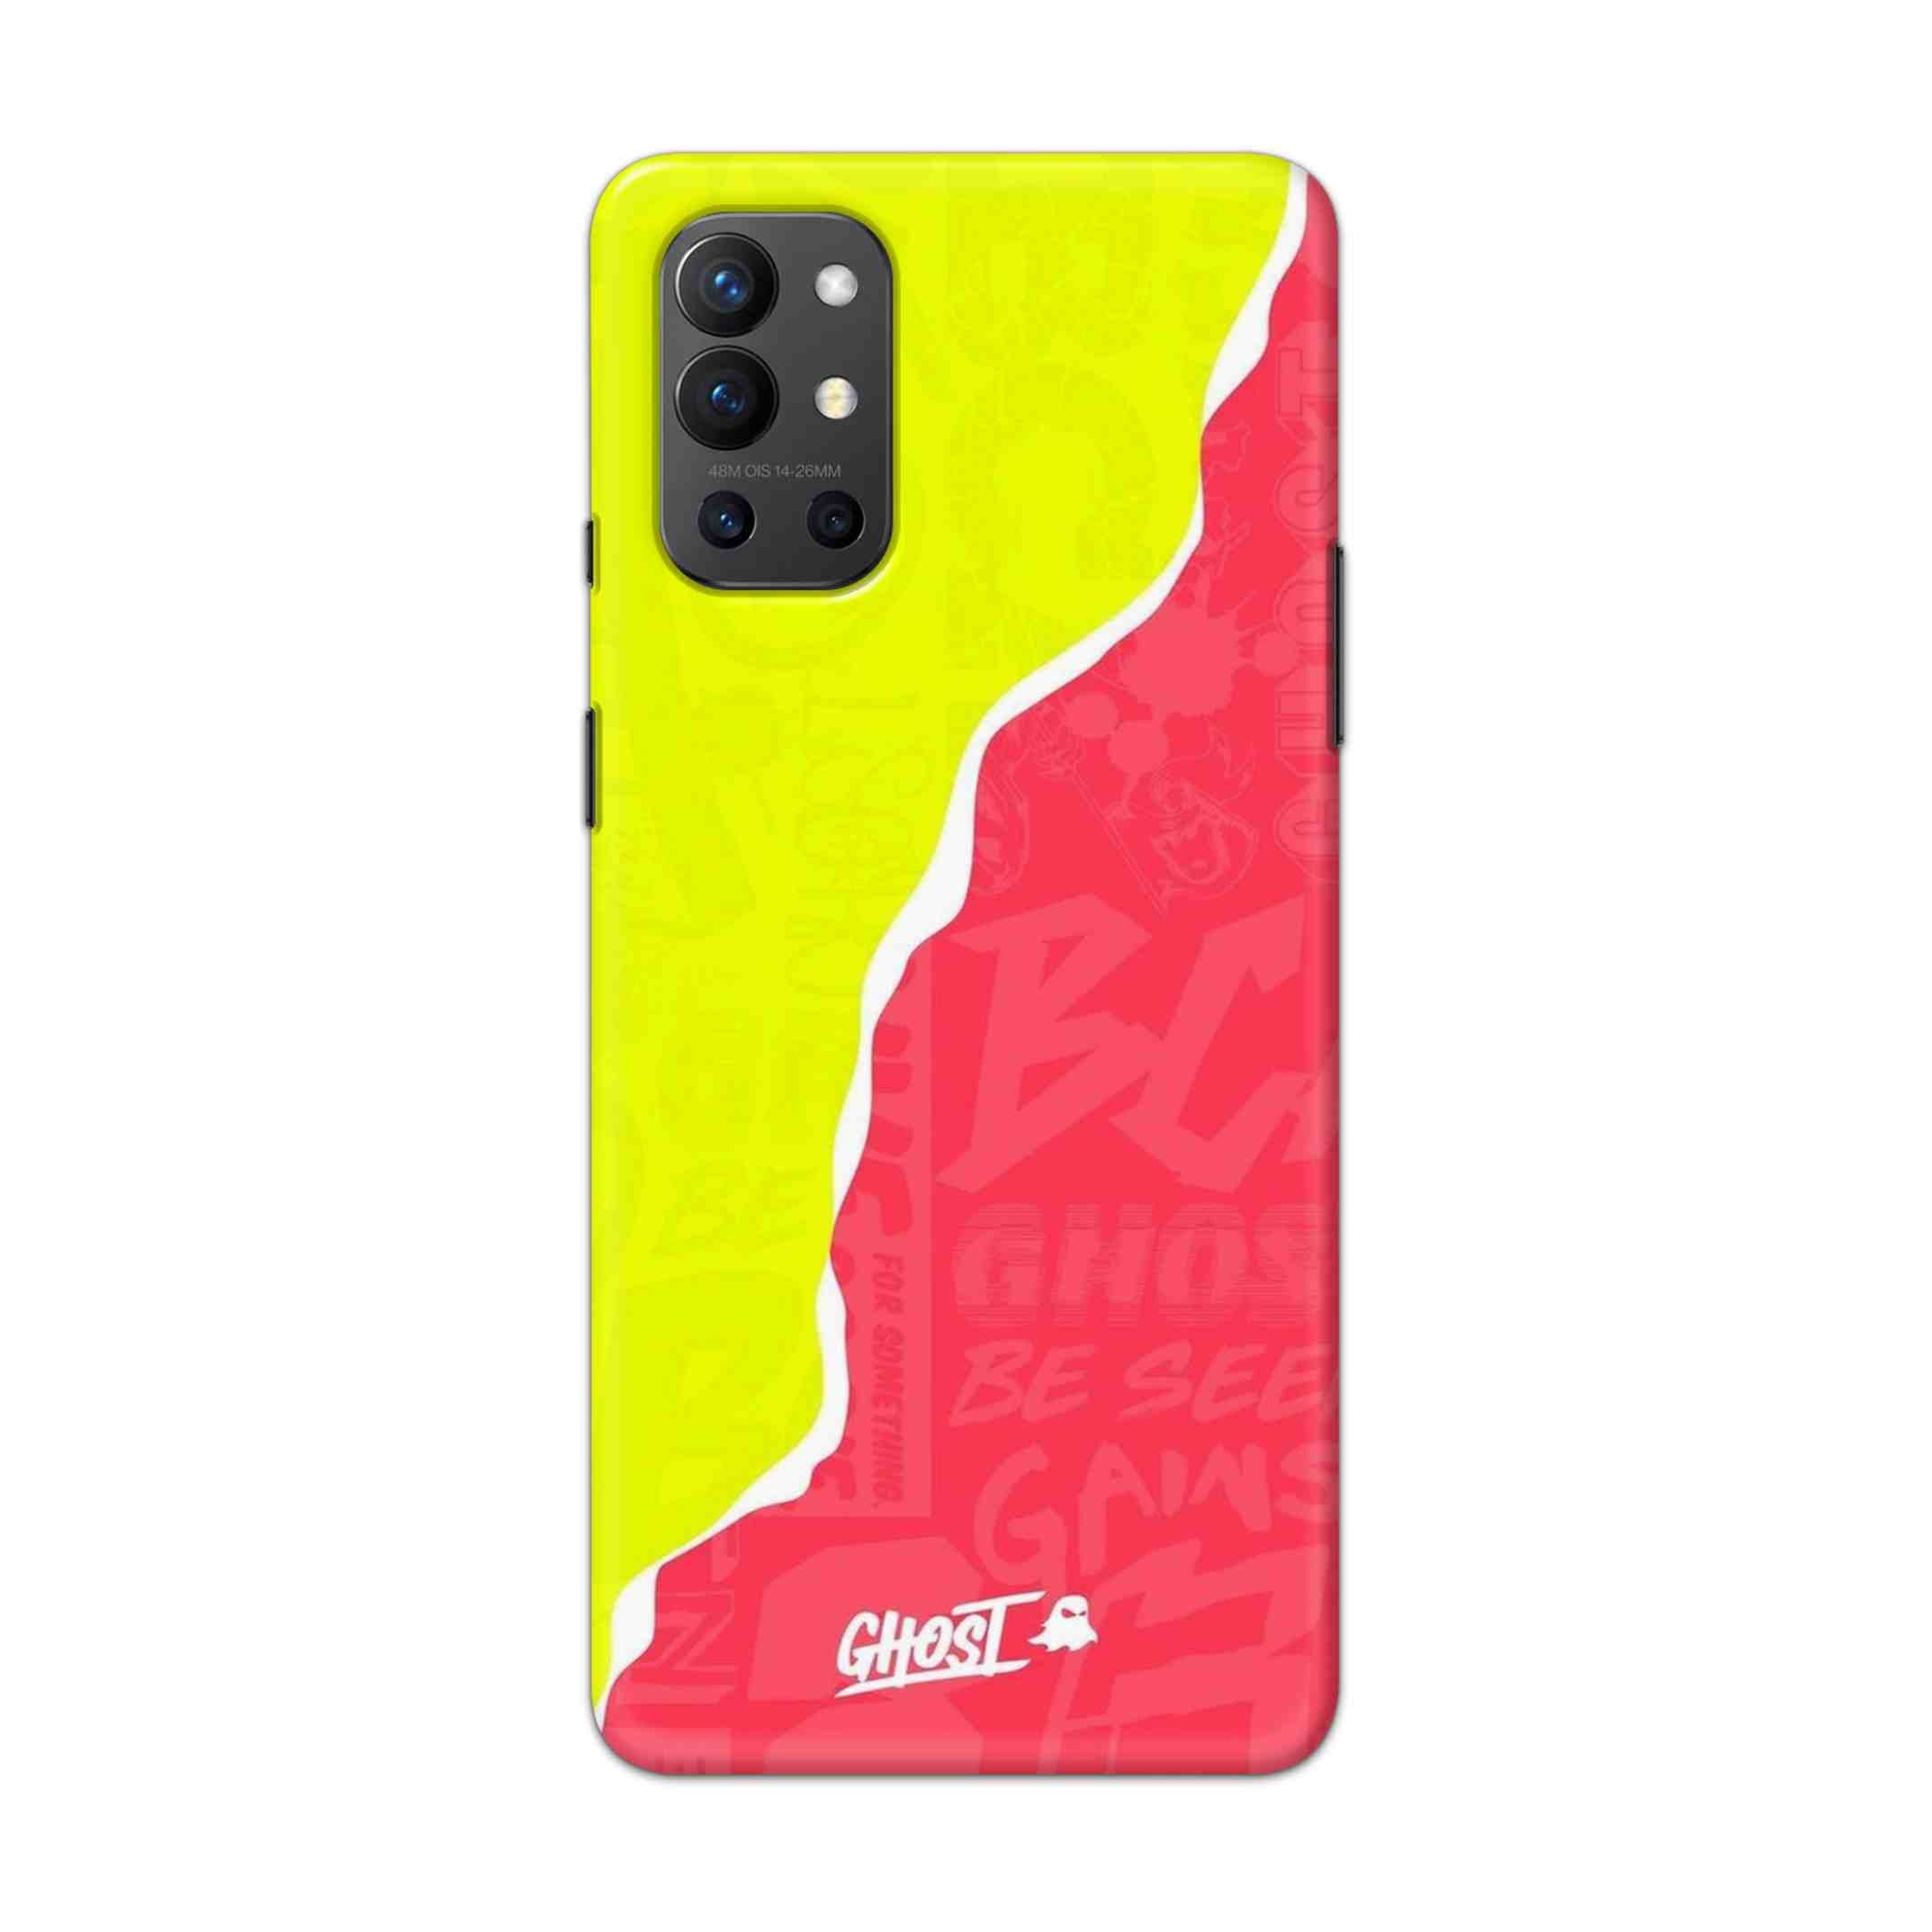 Buy Ghost Hard Back Mobile Phone Case Cover For OnePlus 9R / 8T Online